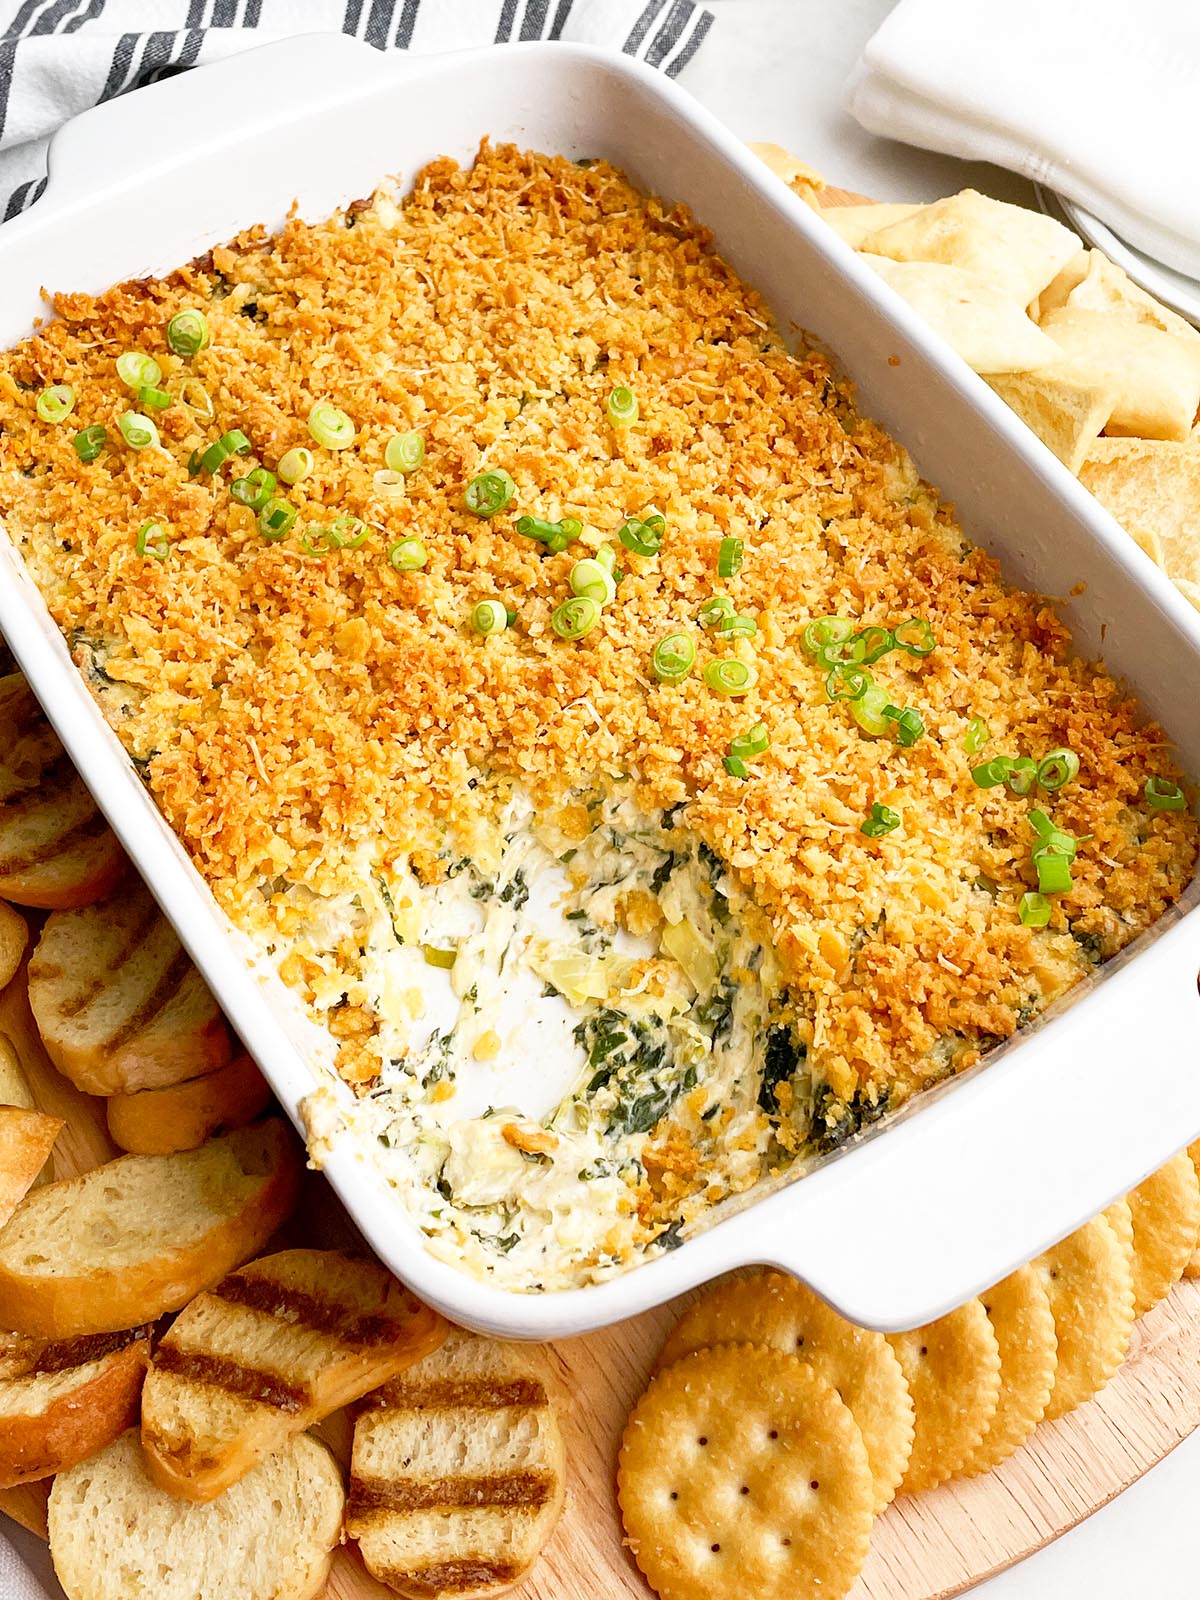 crab spinach artichoke dip in white baking dish with pita chips and crostini.